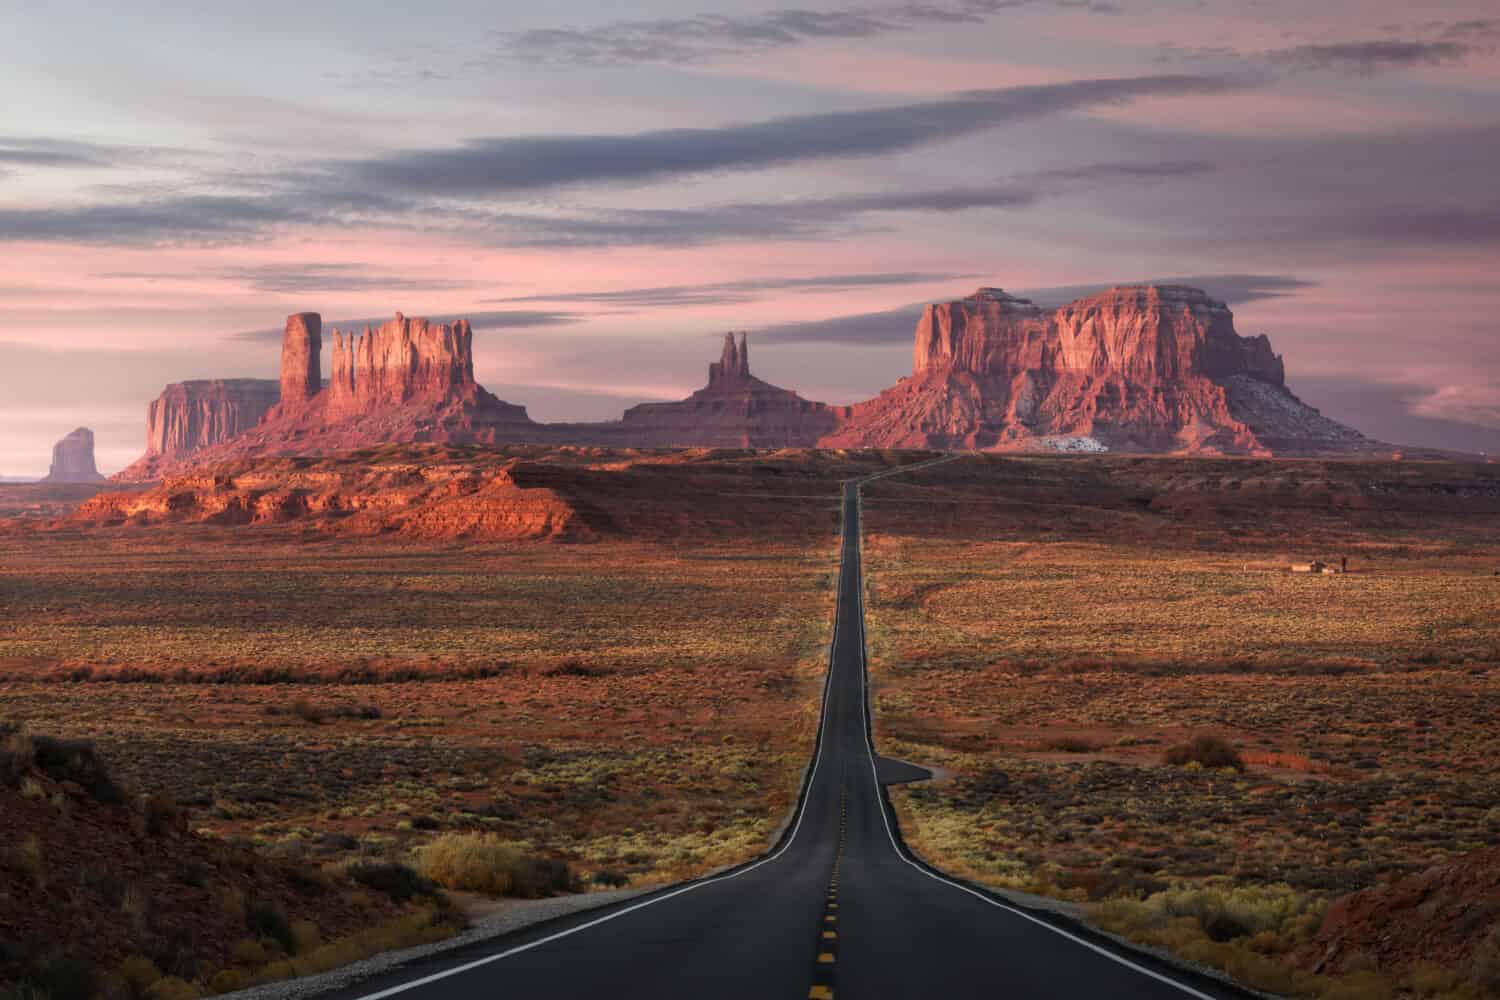 Forrest Gump Point, red rock at Monument Valley, Navajo Tribal Park, Arizona USA. Stunning view and scenic road in Utah during sunrise. Depth of long empty road.